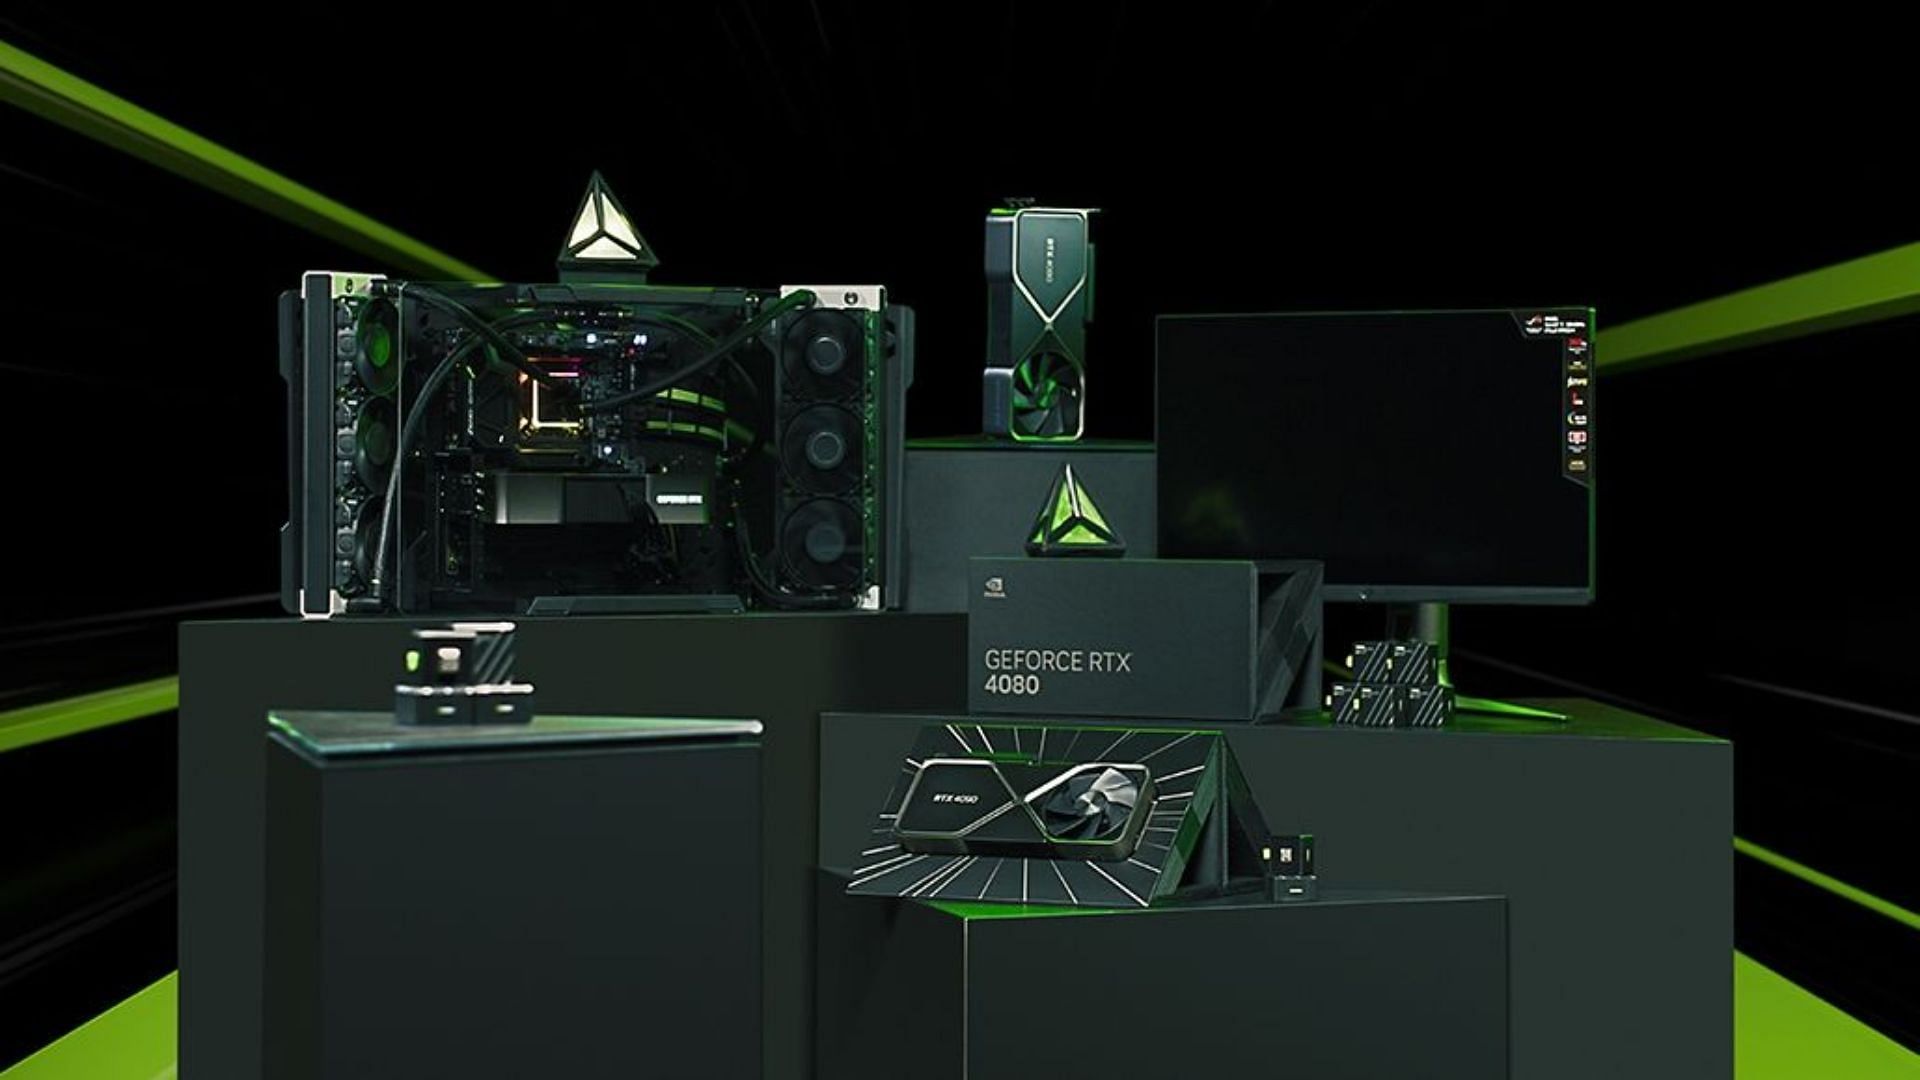 NVIDIA Prepares GeForce RTX 4060 Ti and RTX 4060 Launches in May